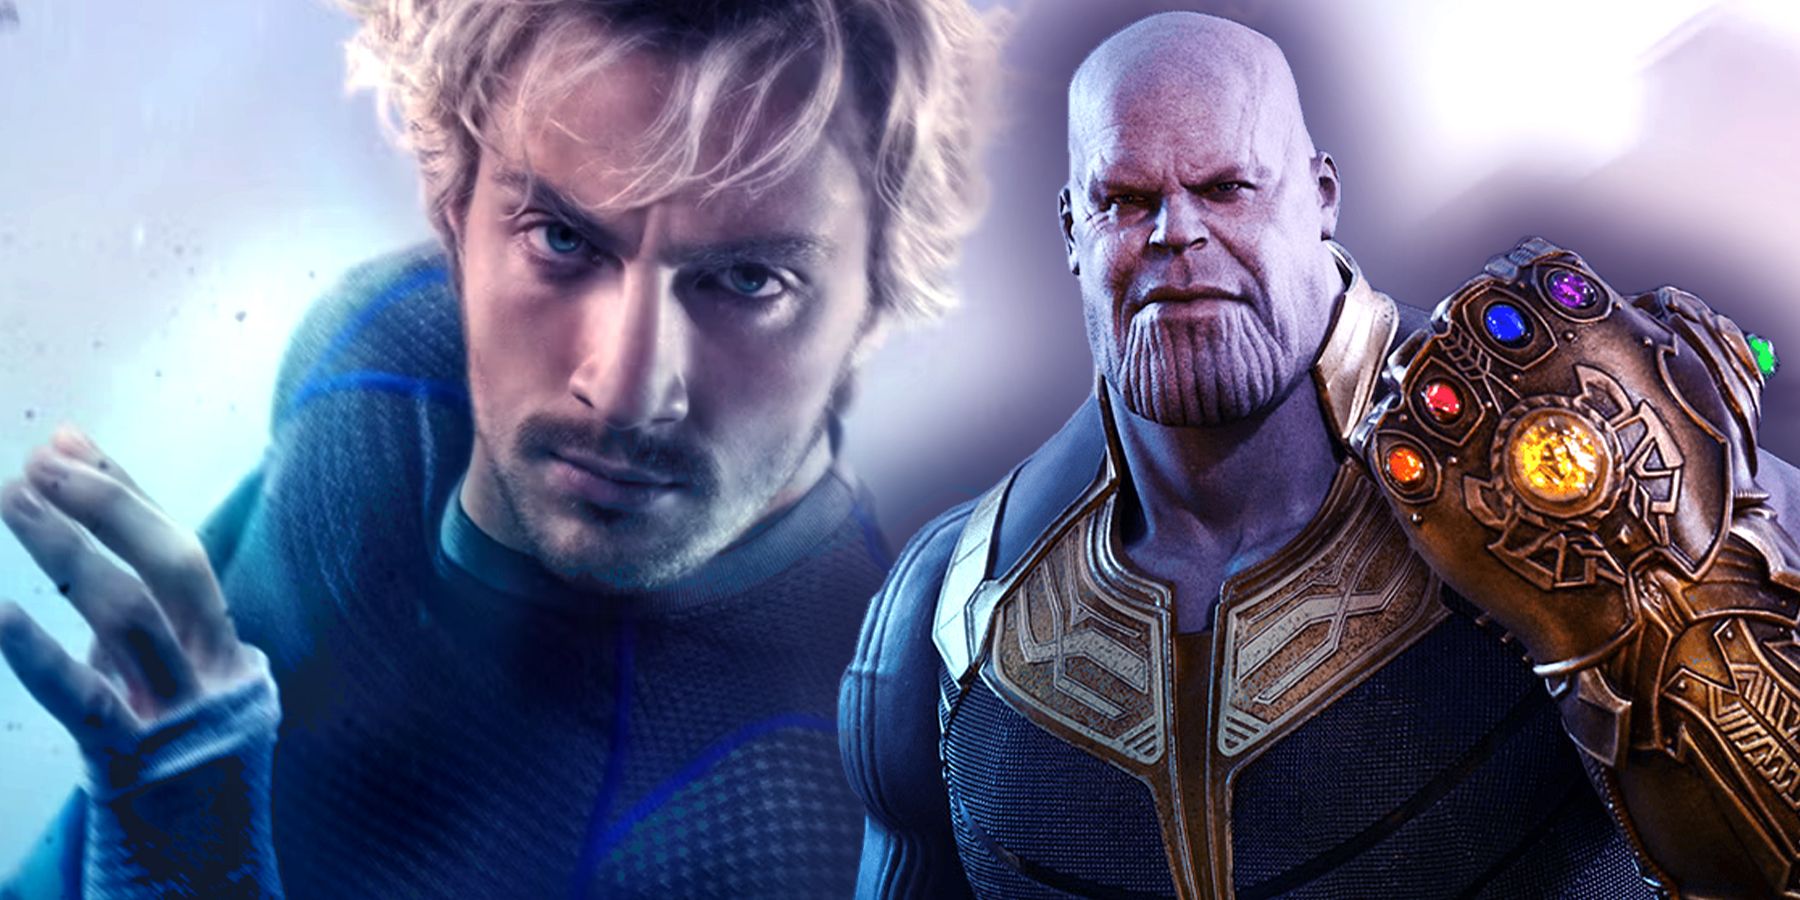 5 MCU Actors Who Nailed Their Roles (& 5 Who Fell Short)